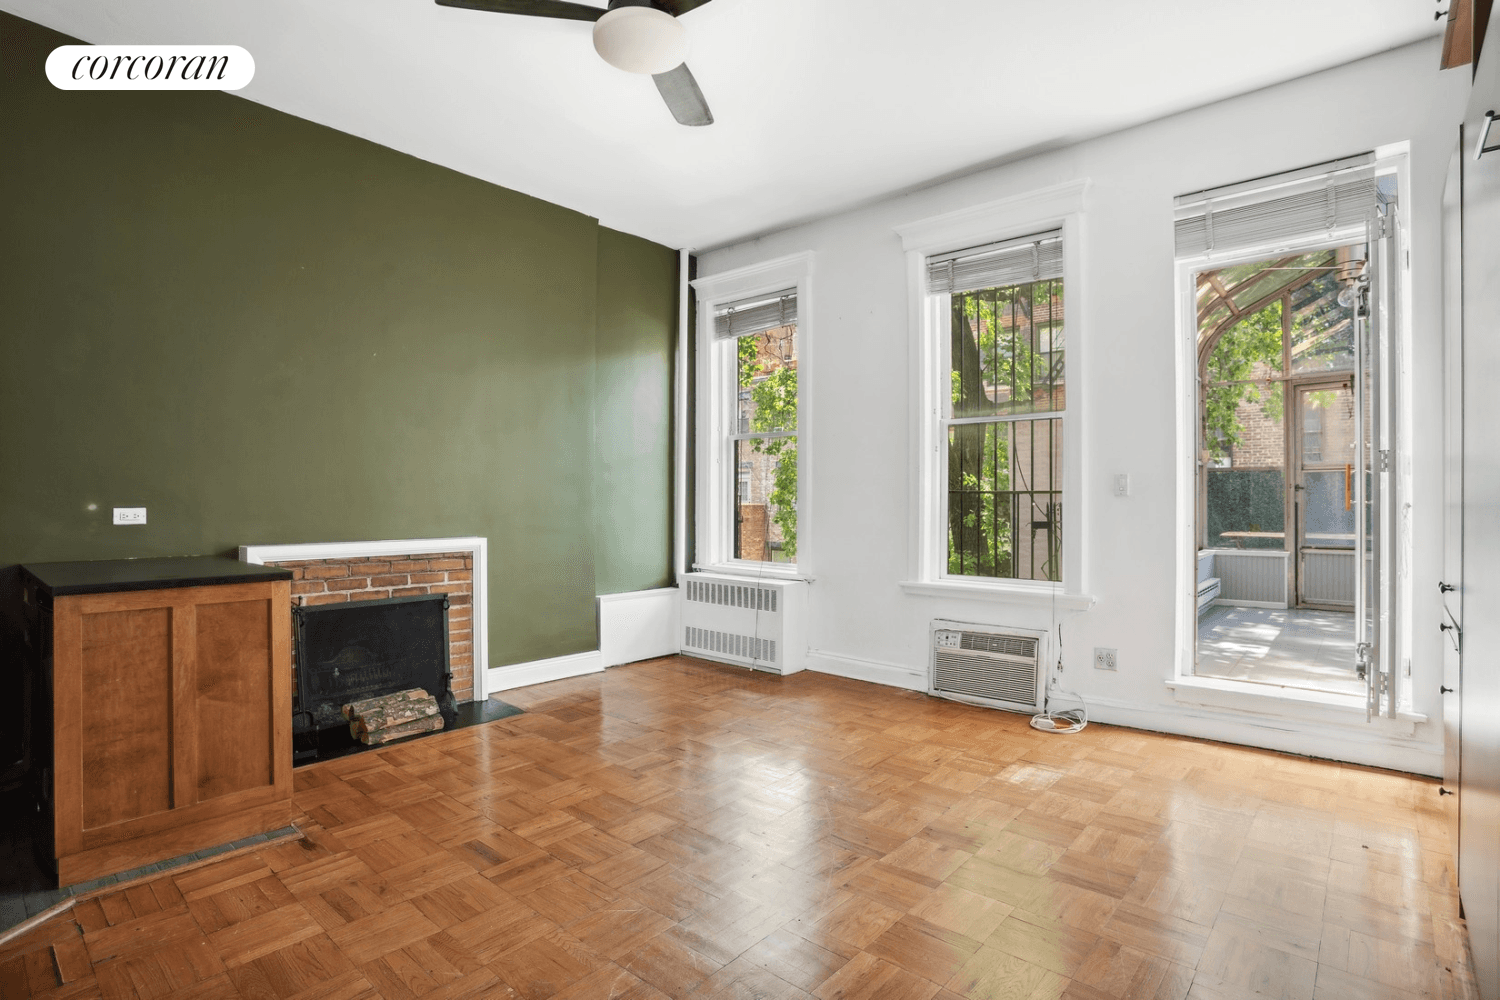 Welcome to your south facing brownstone apartment, just half a block from Central Park.